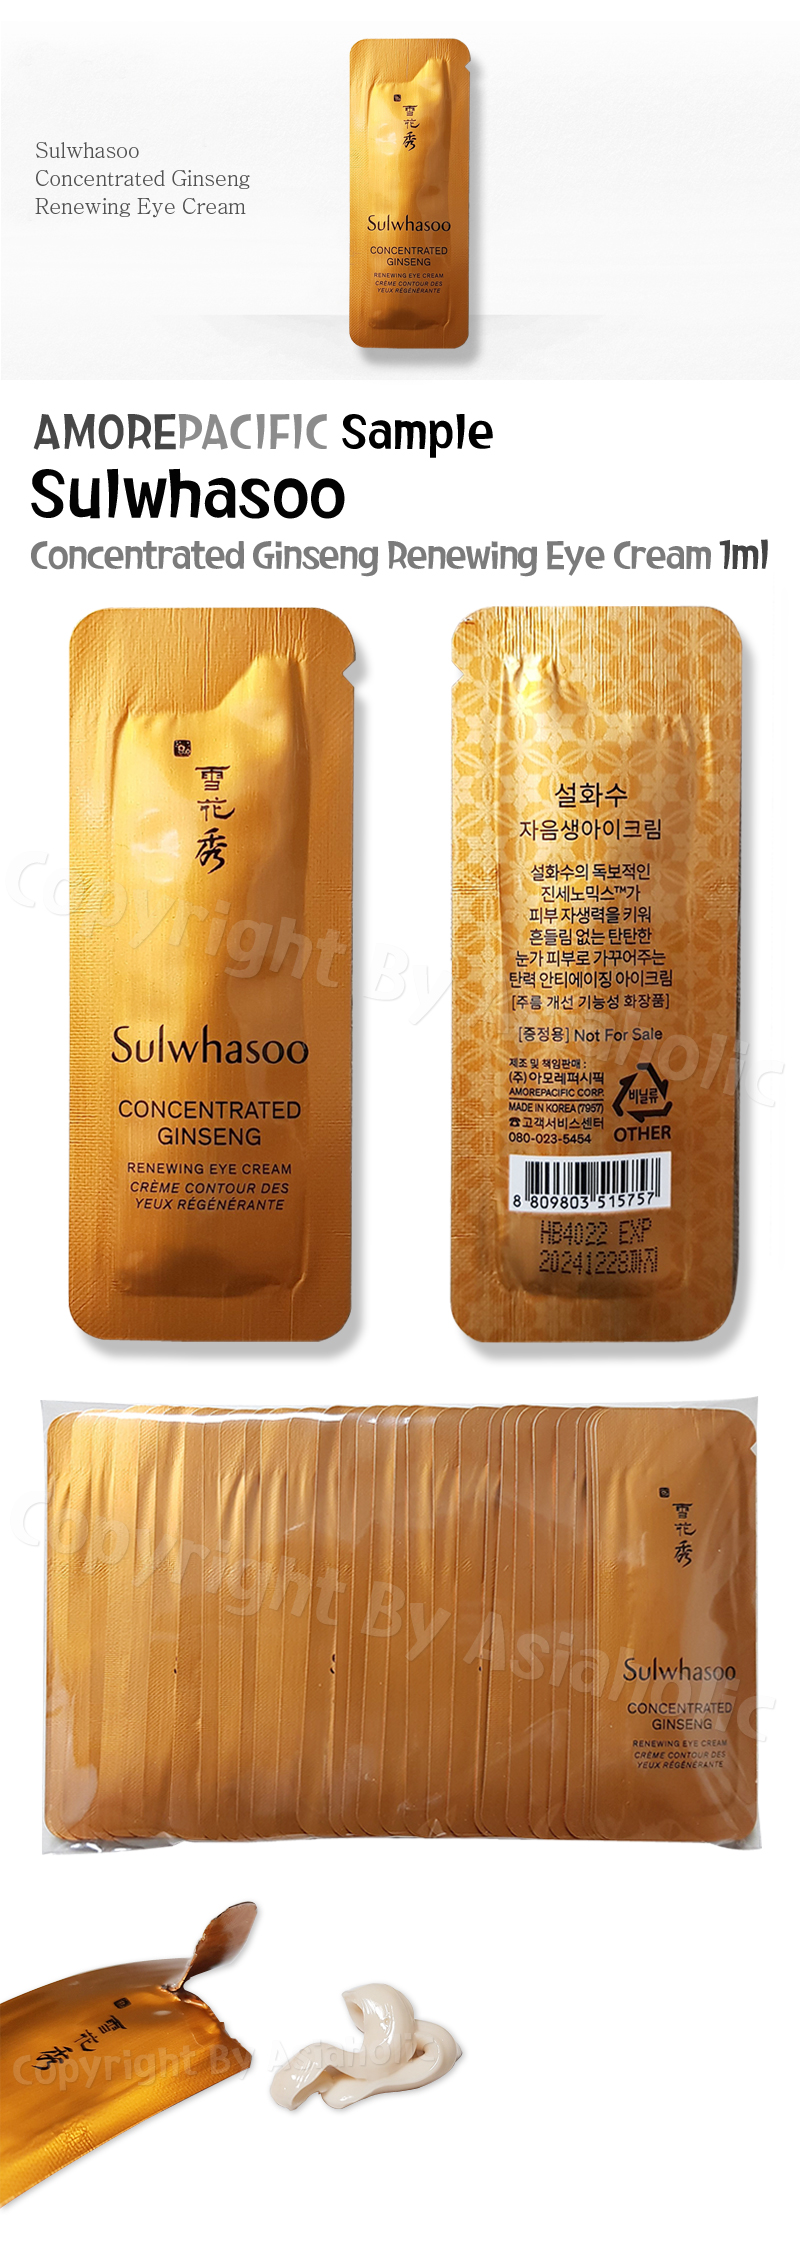 Sulwhasoo Concentrated Ginseng Renewing Eye Cream 1ml x 50pcs (50ml) Newest Version